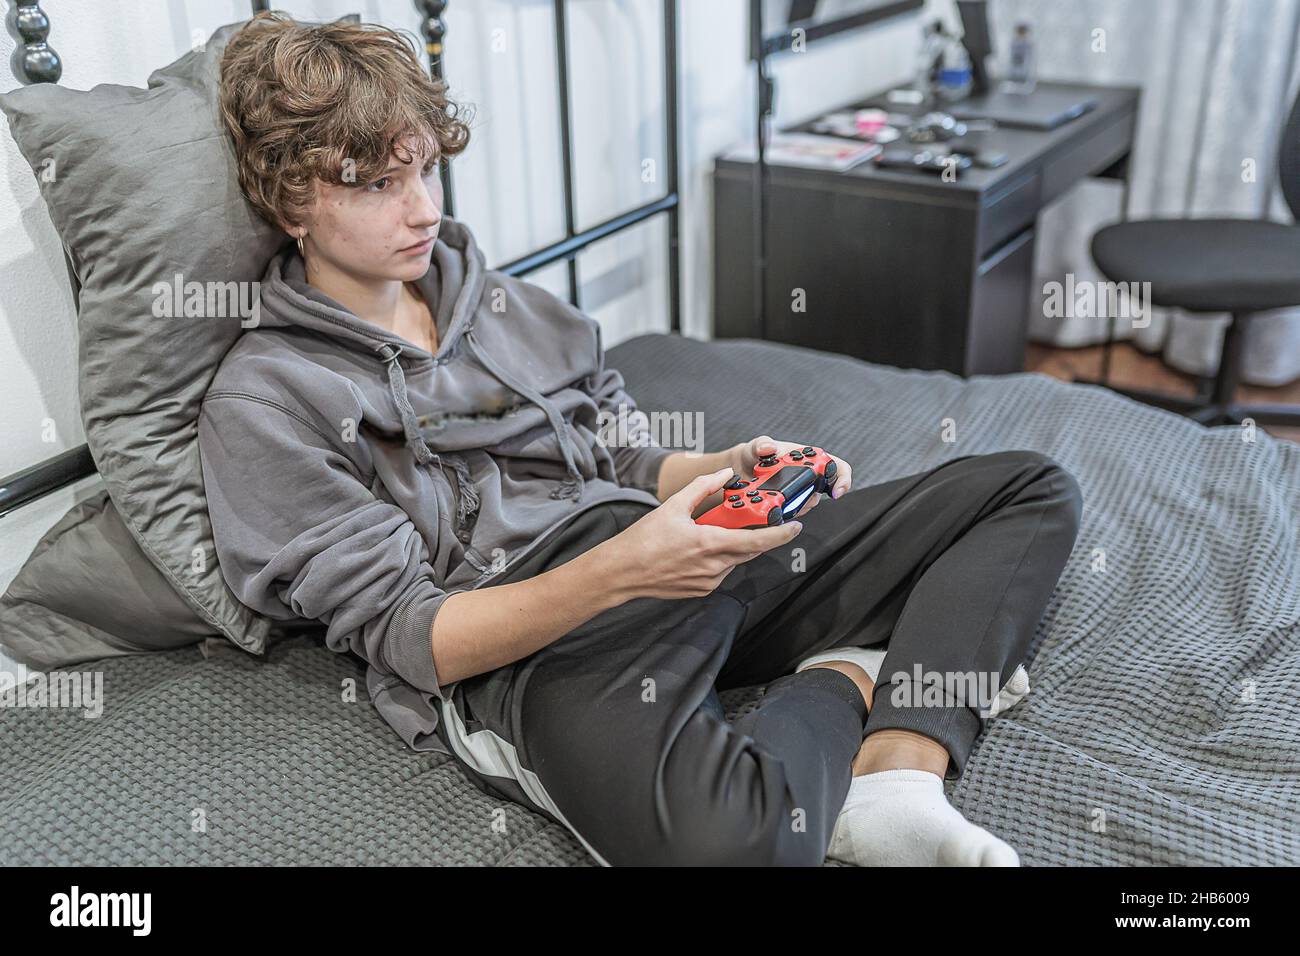 teenage girl with short brown curly hair, dressed in unkempt home clothes, sits on an unmade bed and plays on computer console. Passion for computer Stock Photo